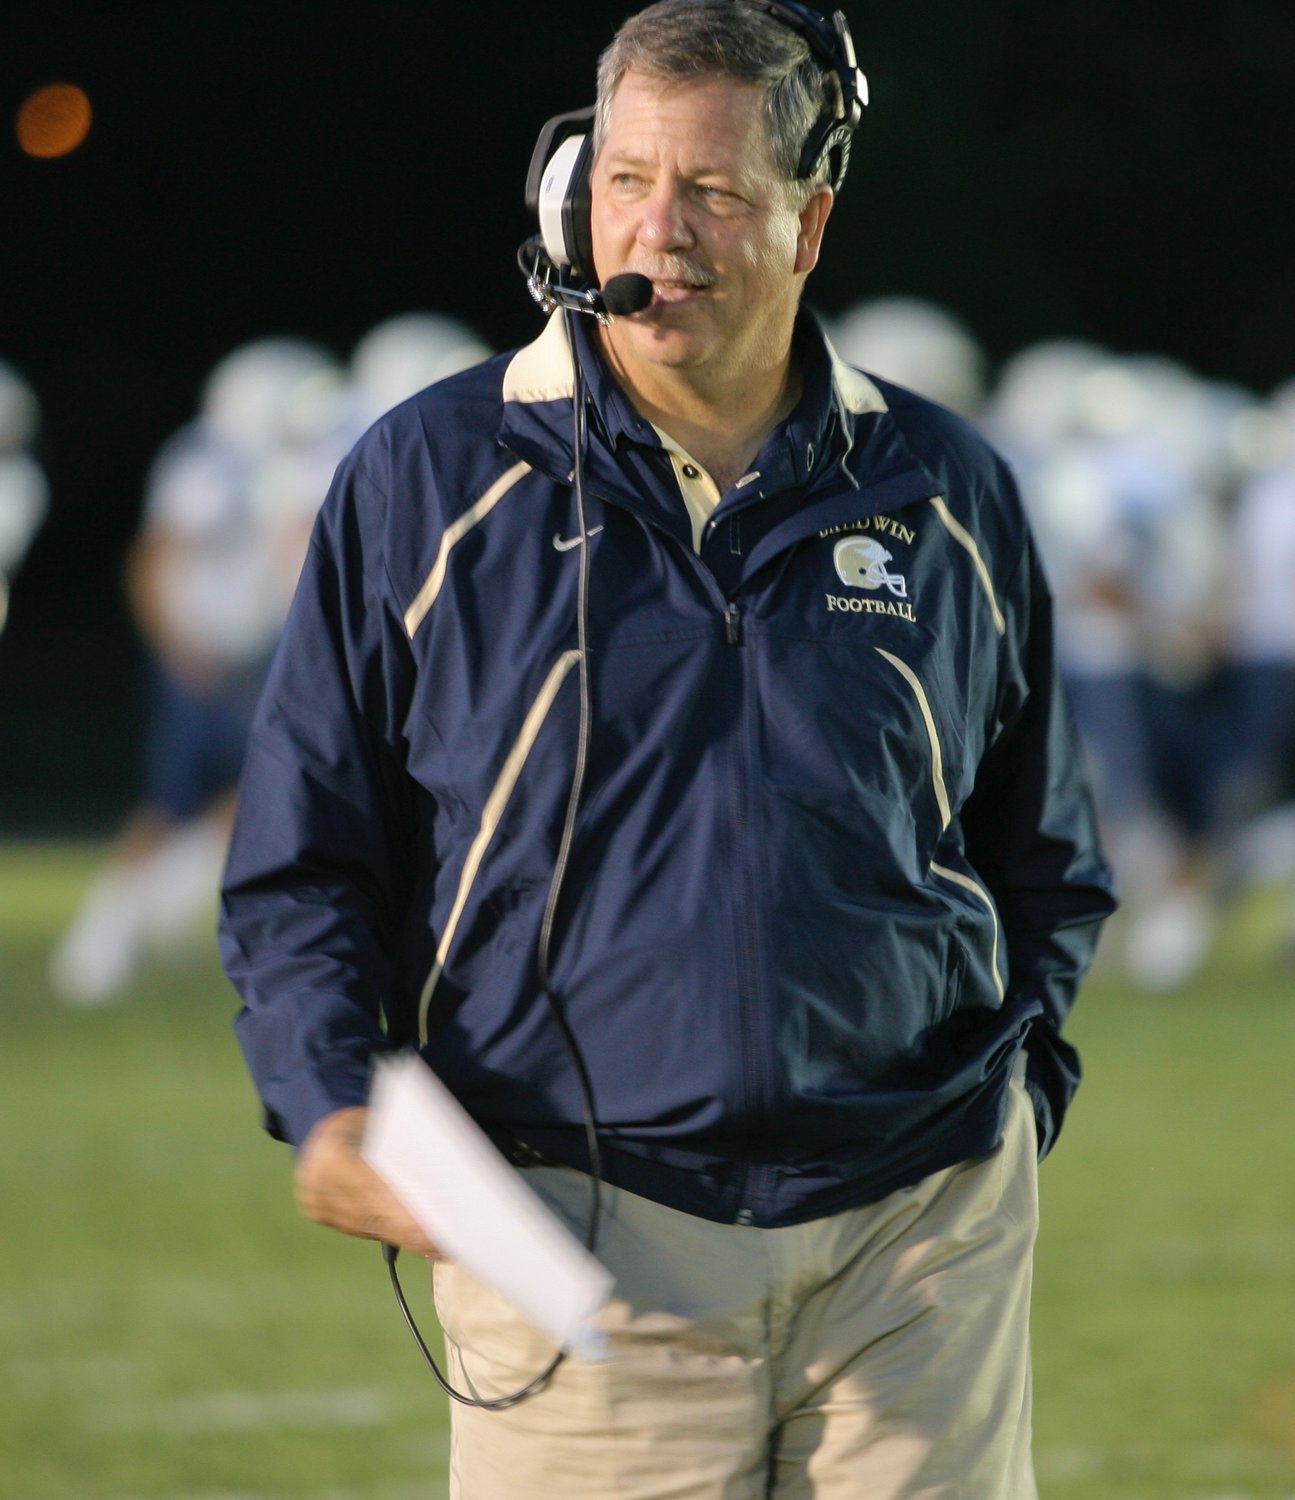 Stephen Carroll, a former Baldwin High School phys. ed. teacher and football coach, has sold more than 100 copies of his book, ‘100 Years of Baldwin Football,’ which he self-published.